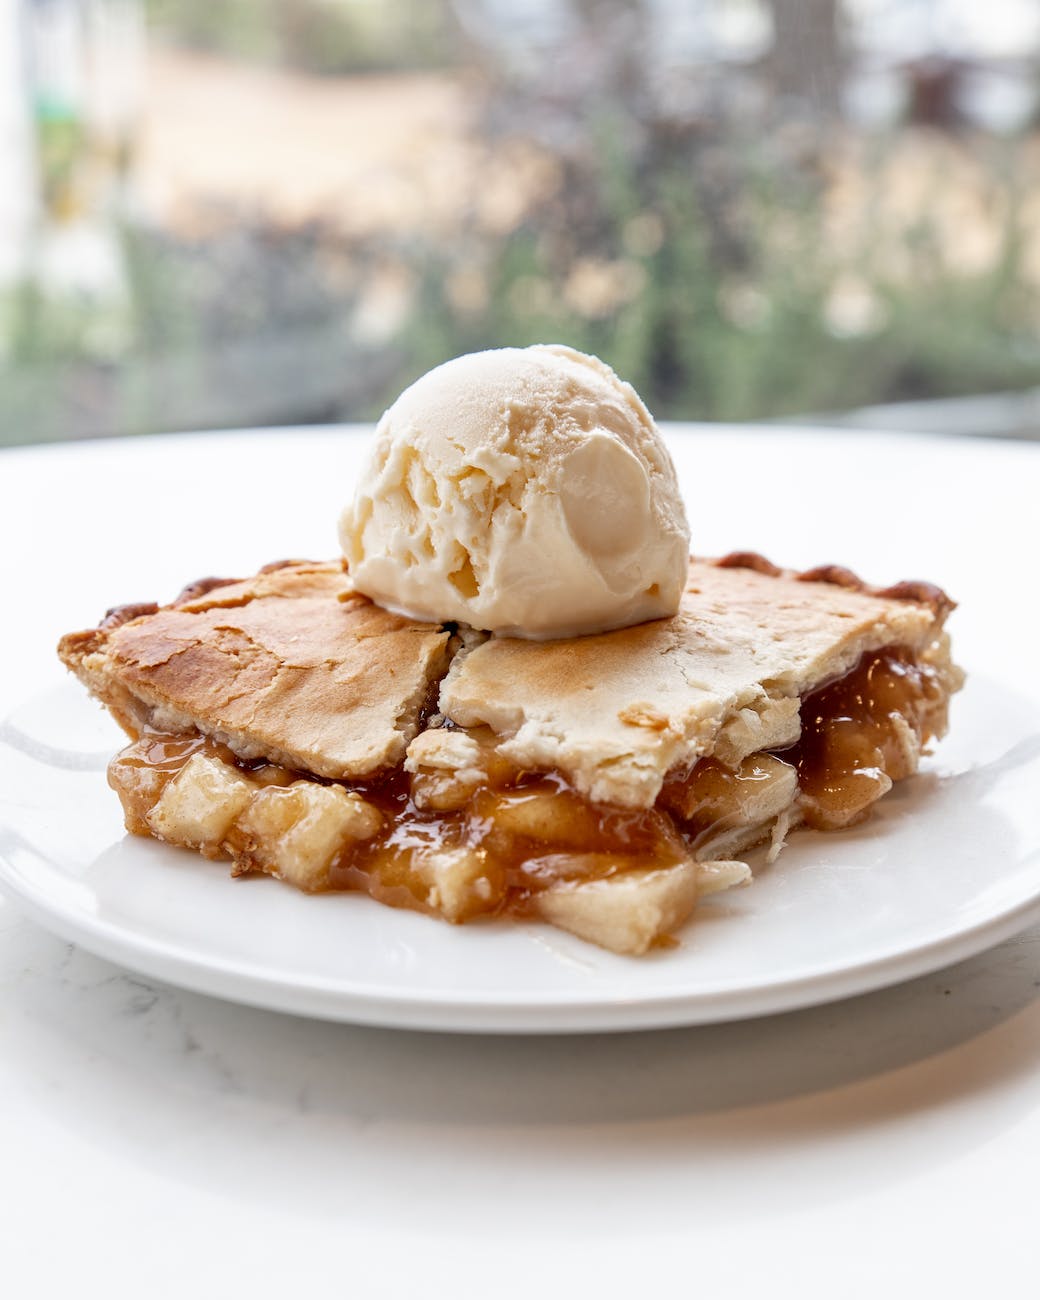 delicious ice cream on plate with apple pie